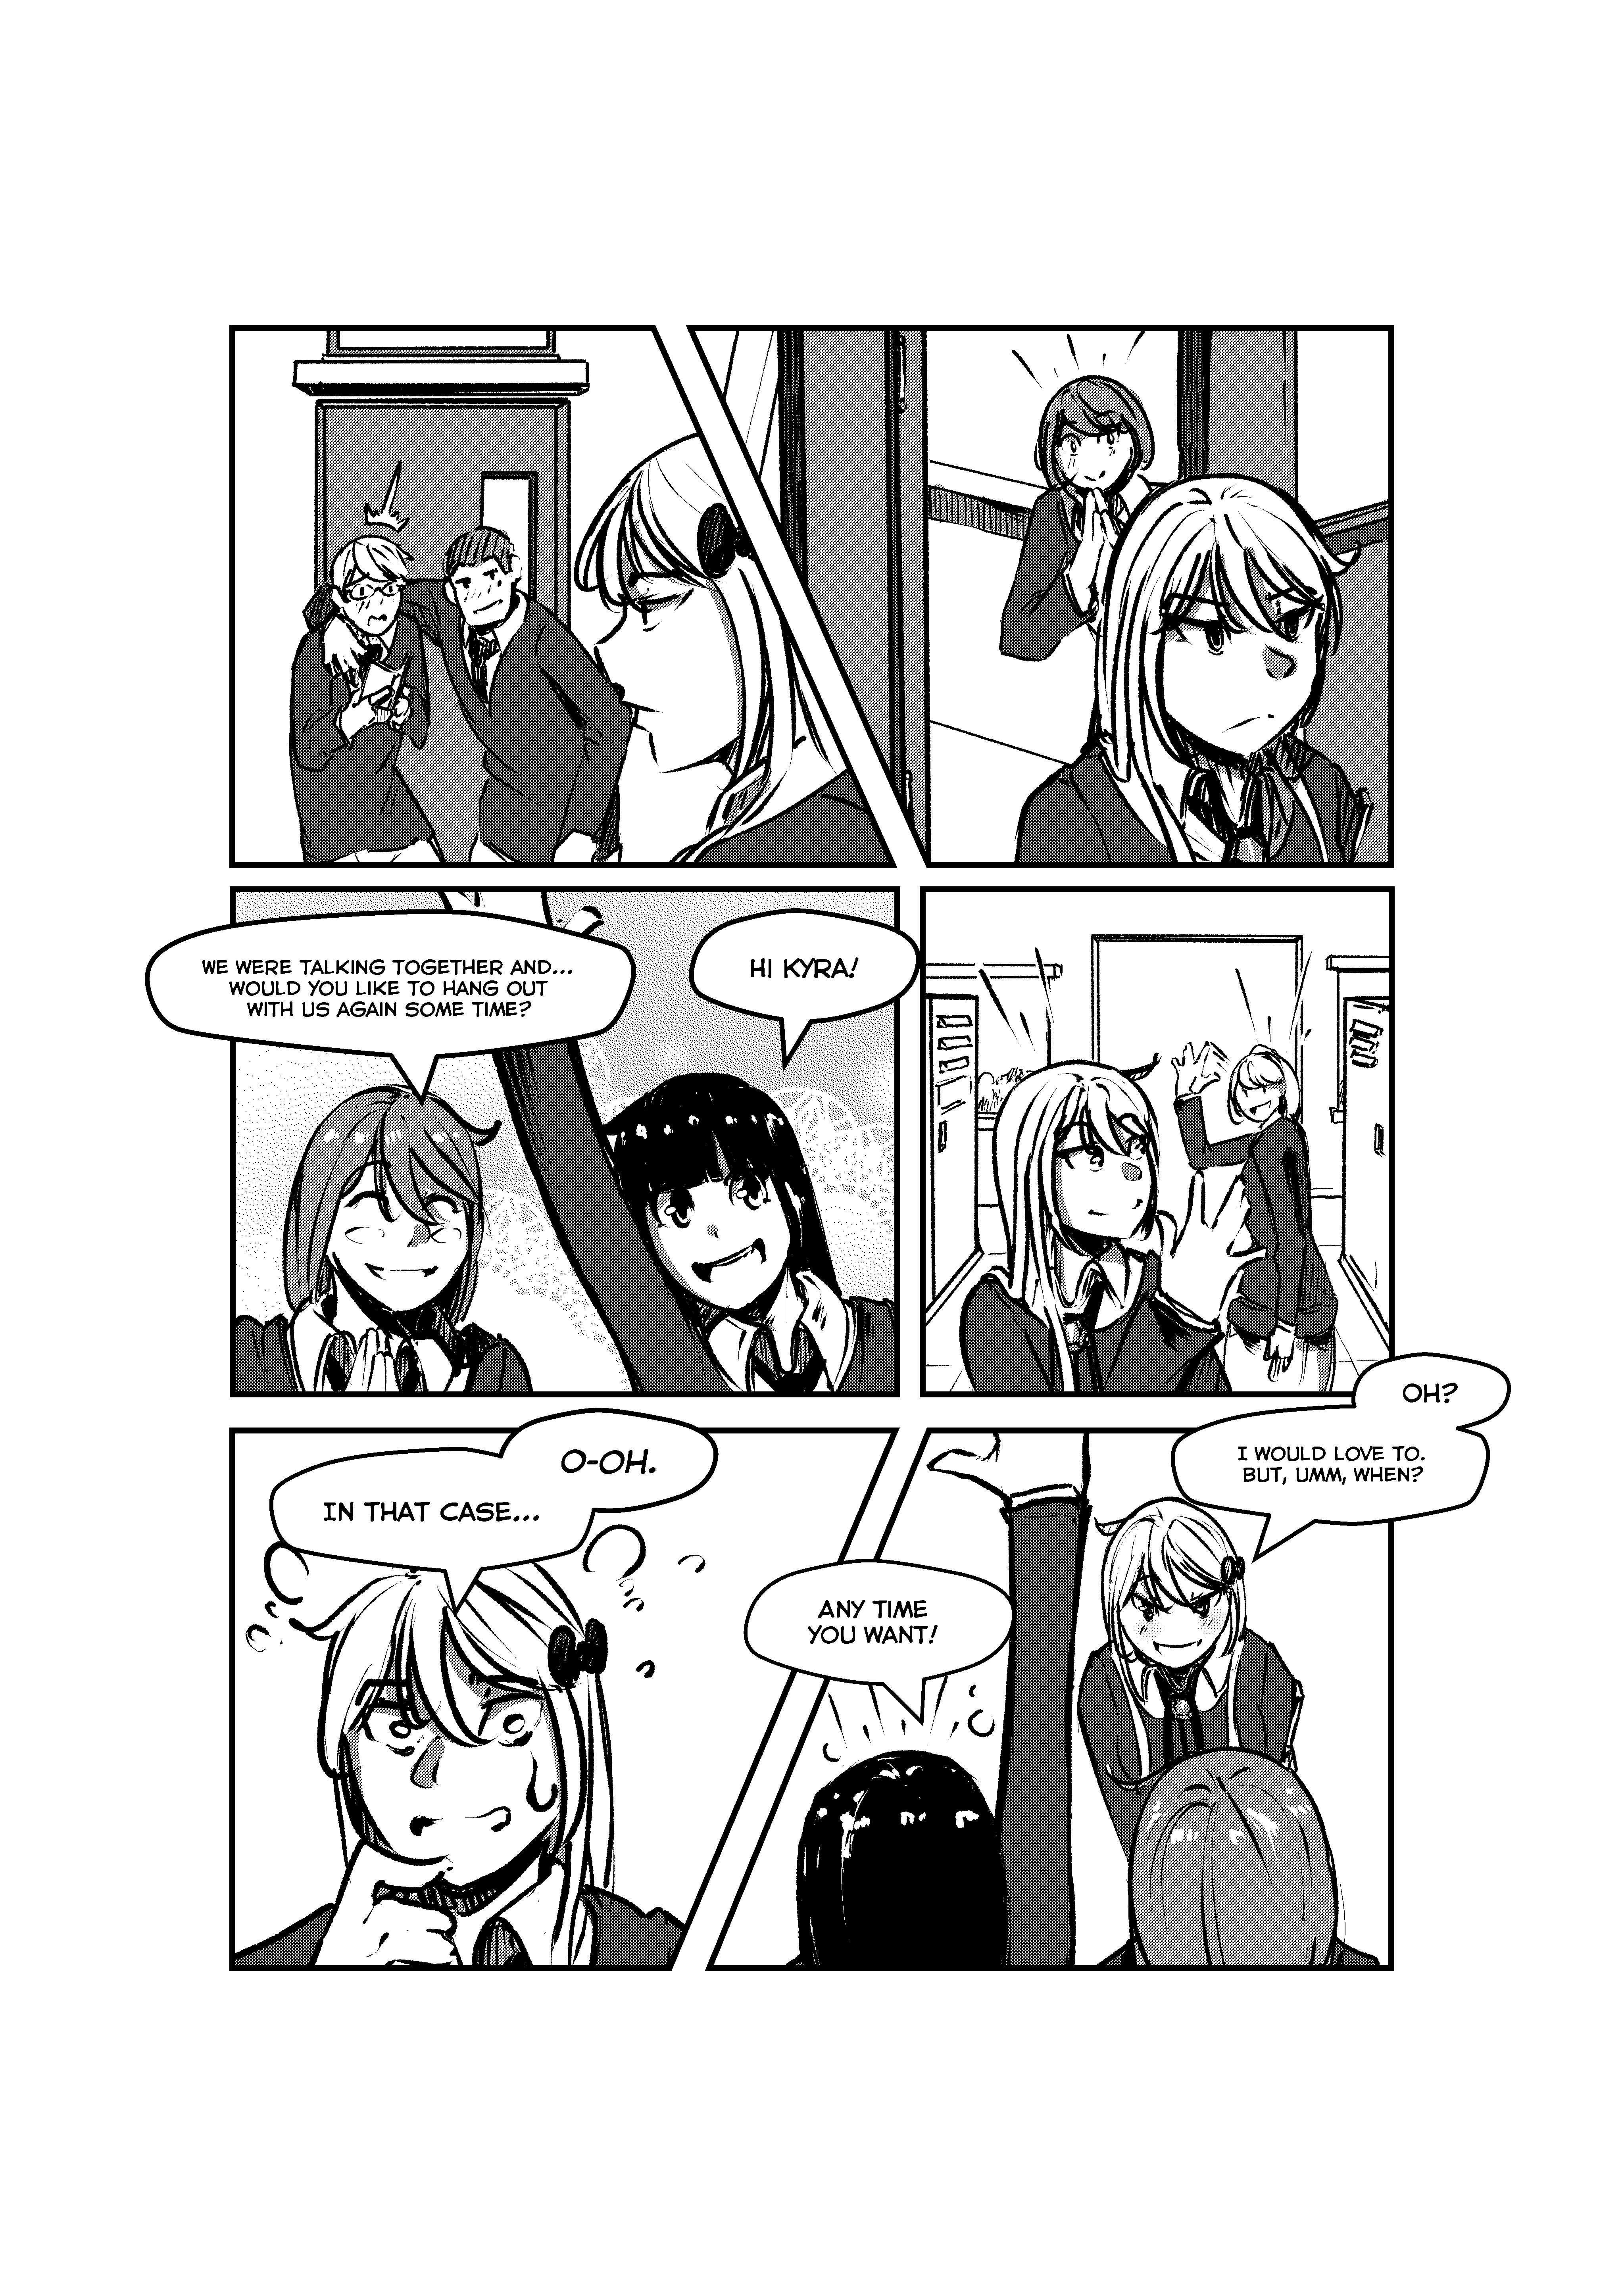 Opposites In Disguise - 14 page 5